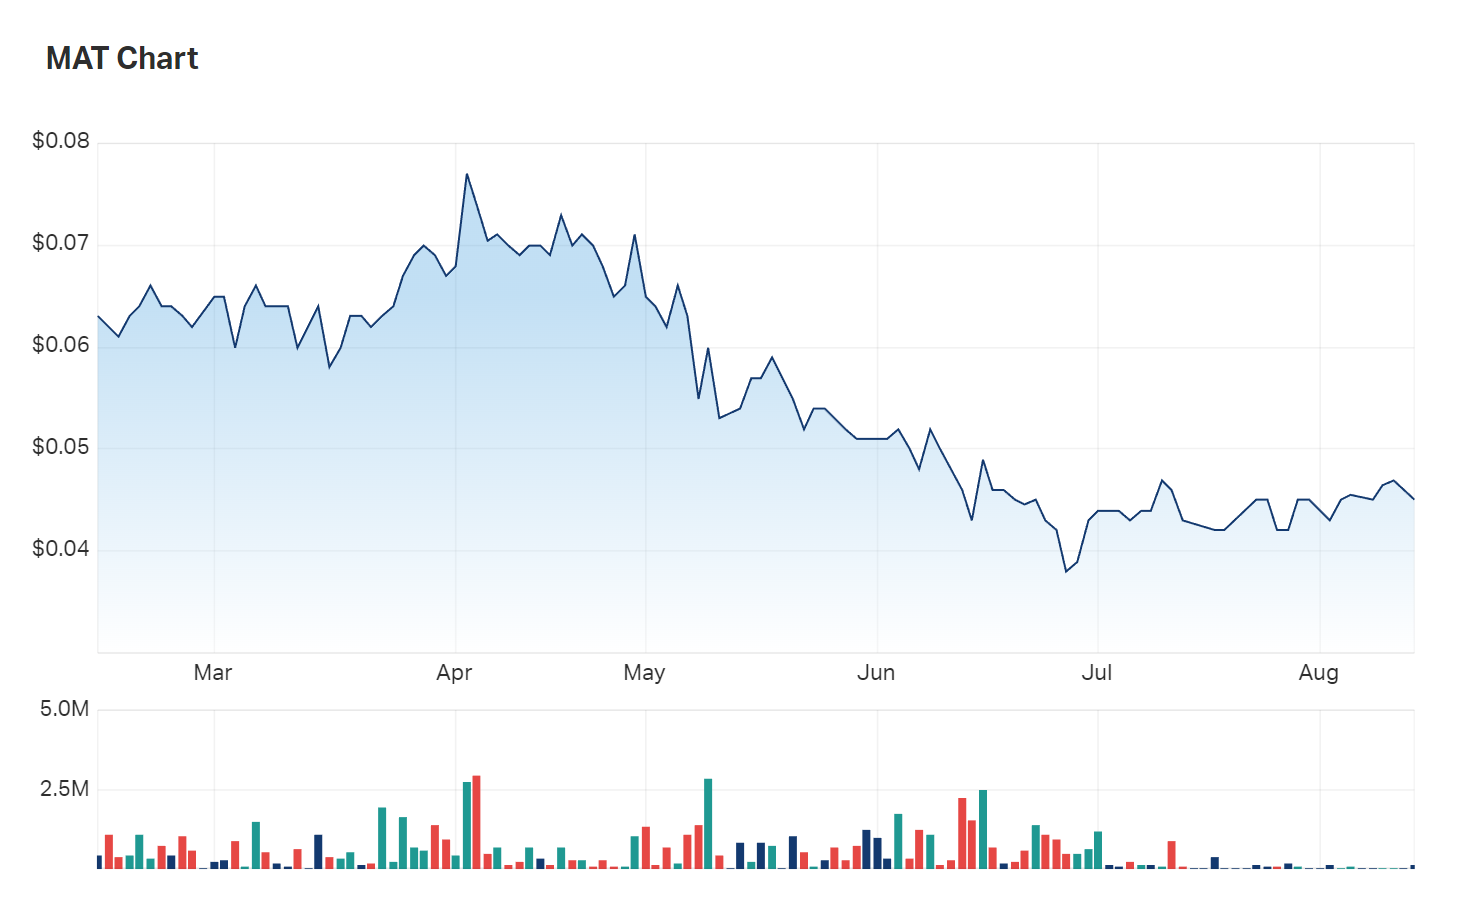 Matsa Resources hasn't been seeing much action on the bourse since early July 